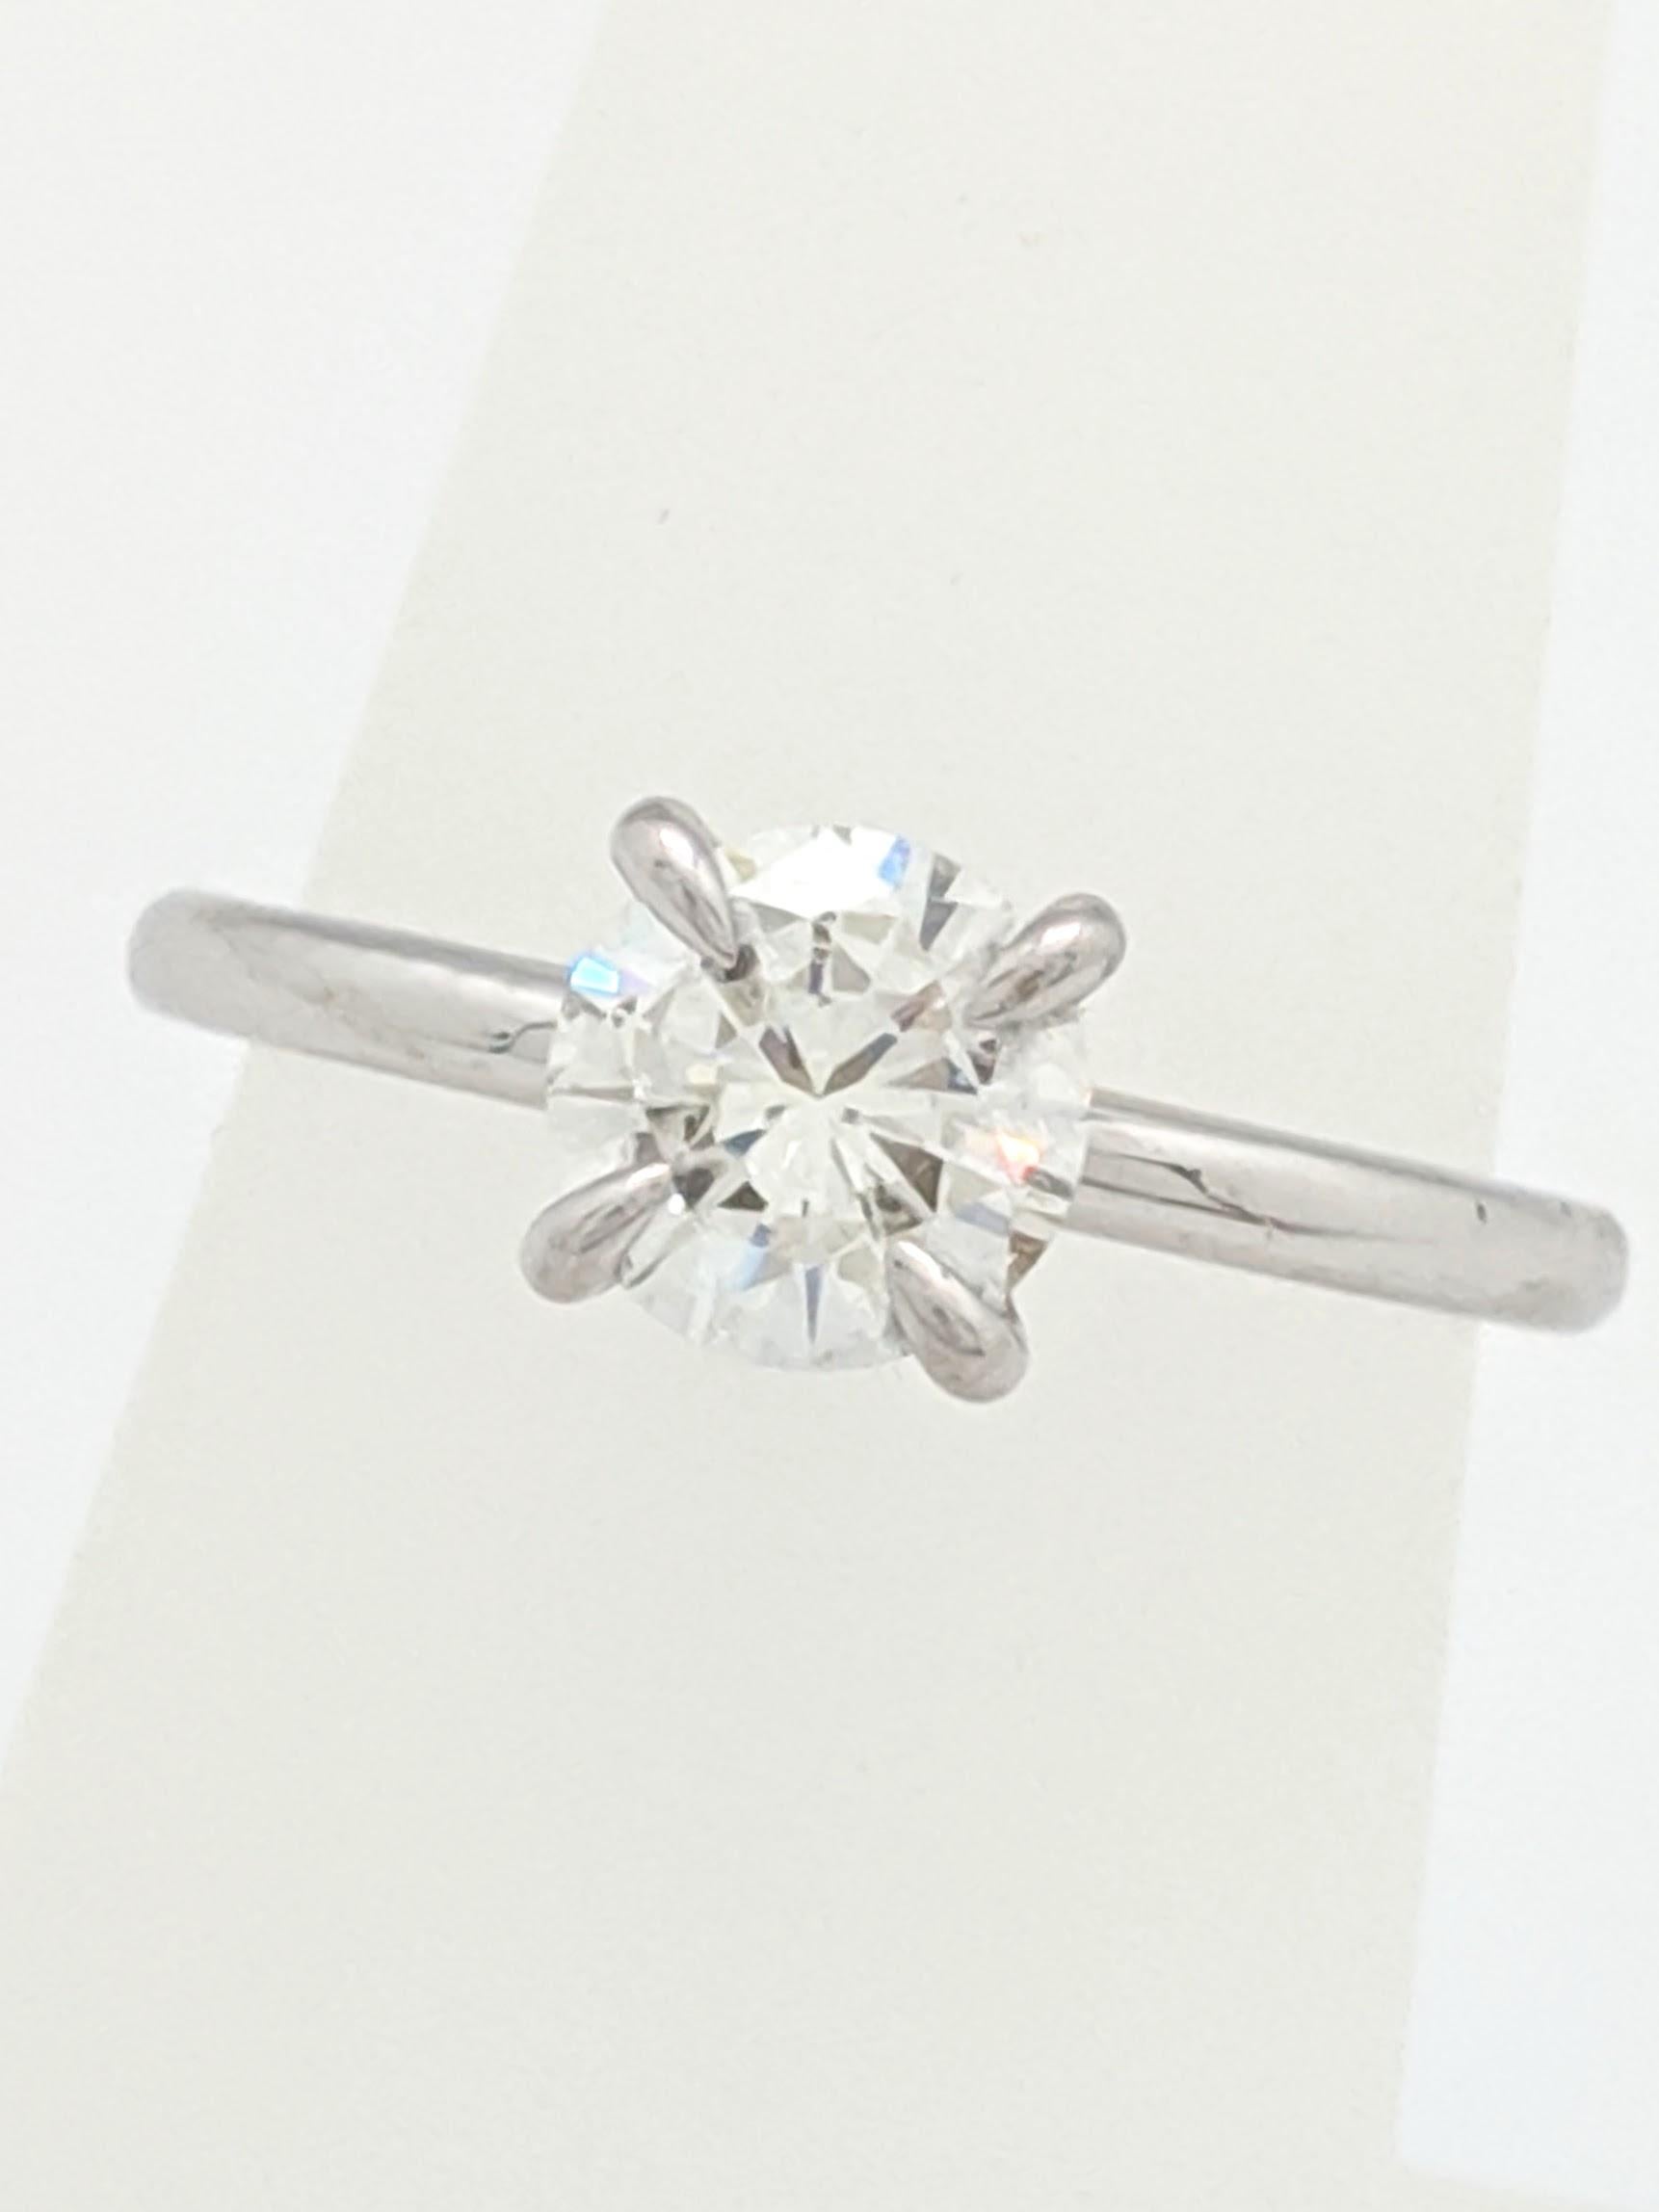 1.02ct. Round Brilliant Cut Natural Diamond Engagement Ring GIA Certified SI1/J

You are viewing a Stunning 1.02ct. natural brilliant cut diamond. This diamond is certified by GIA (Gemological Institute of America) and has been graded as SI1 in